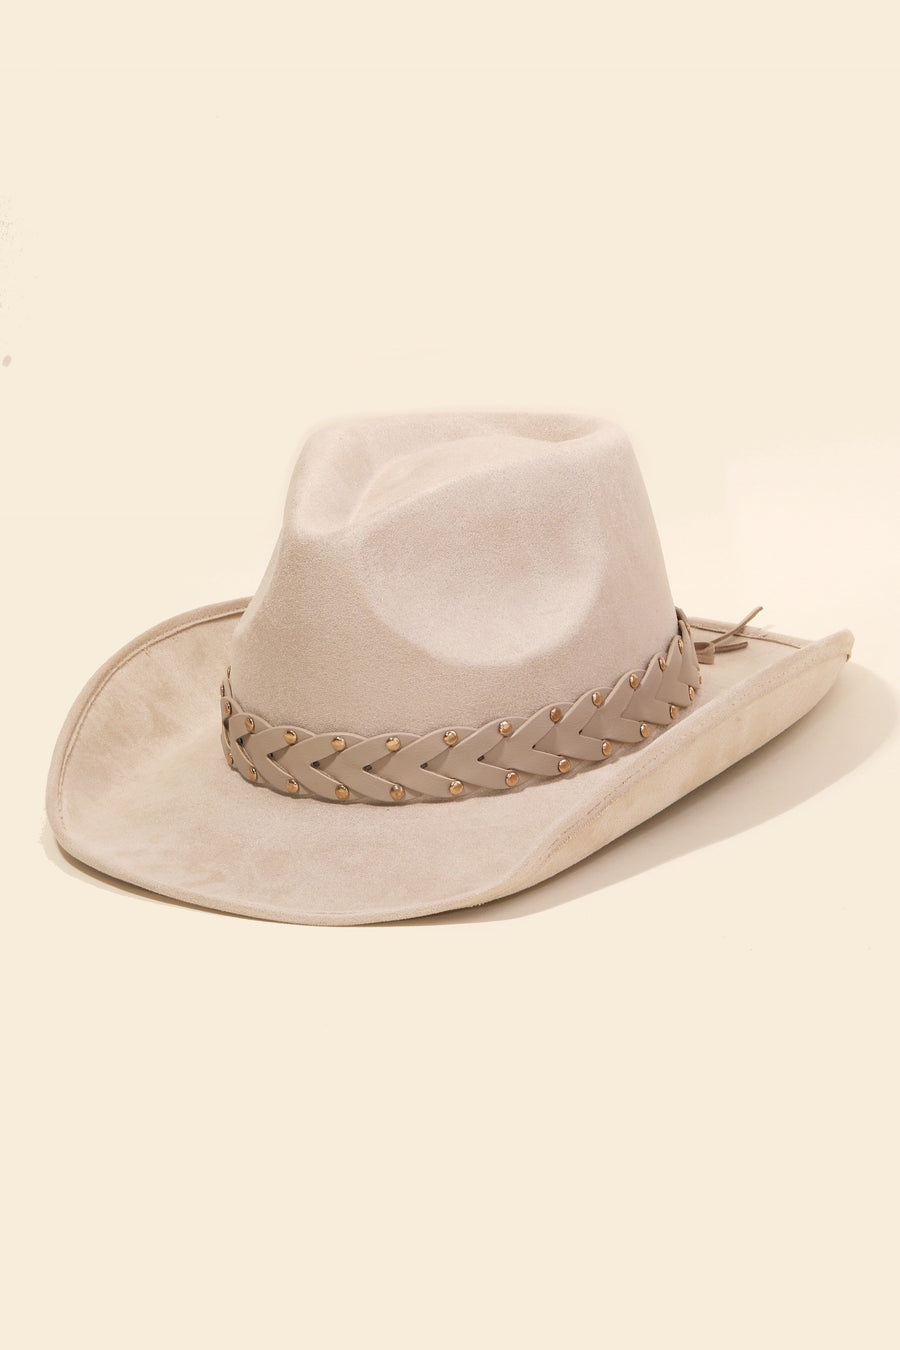 Beige faux leather hat with braided strap. 